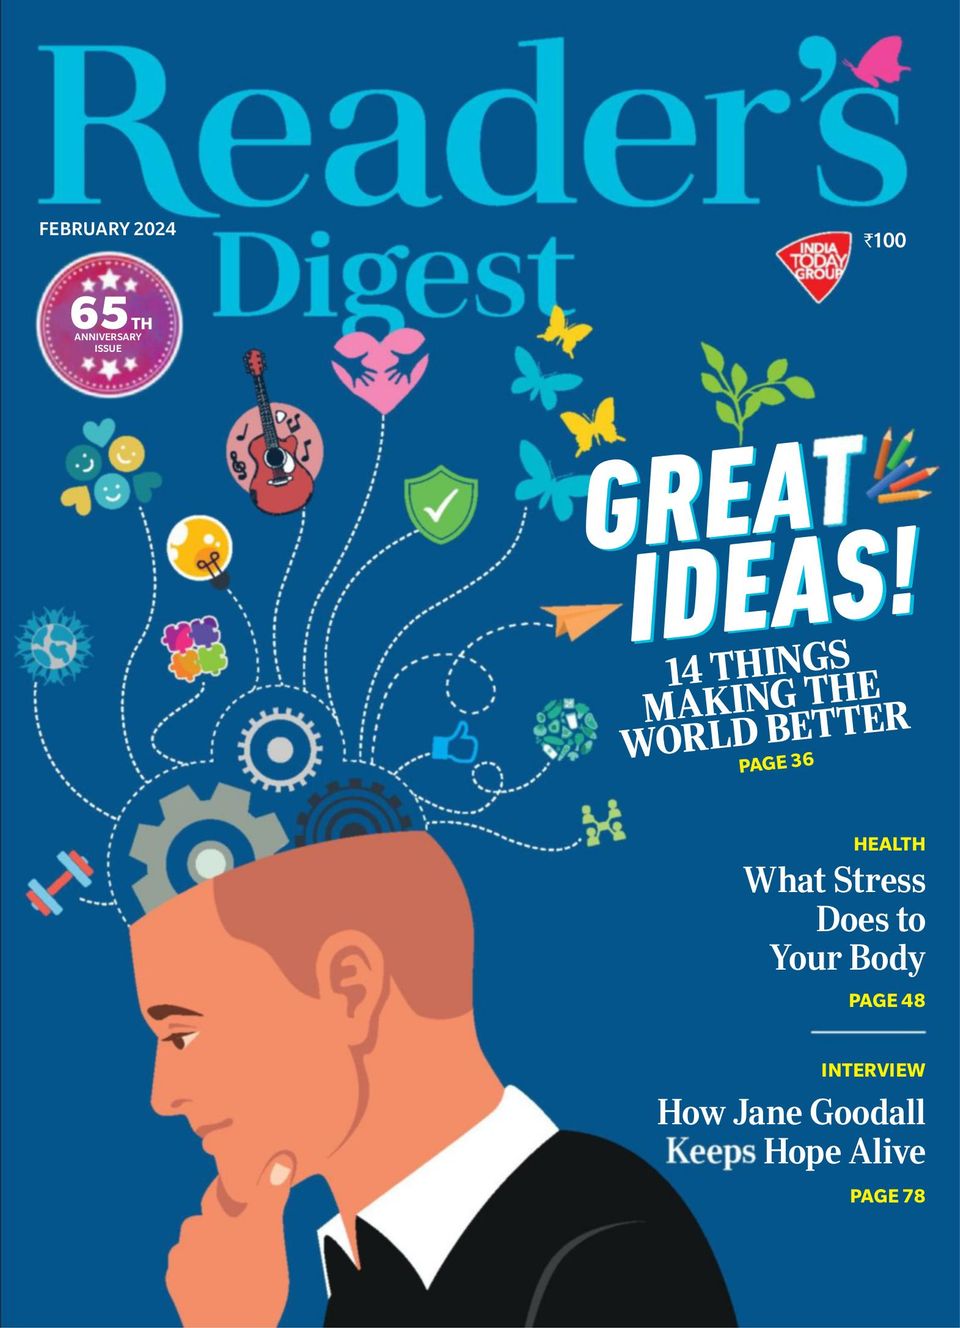 https://www.discountmags.ca/shopimages/products/extras/1313397-reader-s-digest-india-cover-february-2024-issue.jpg